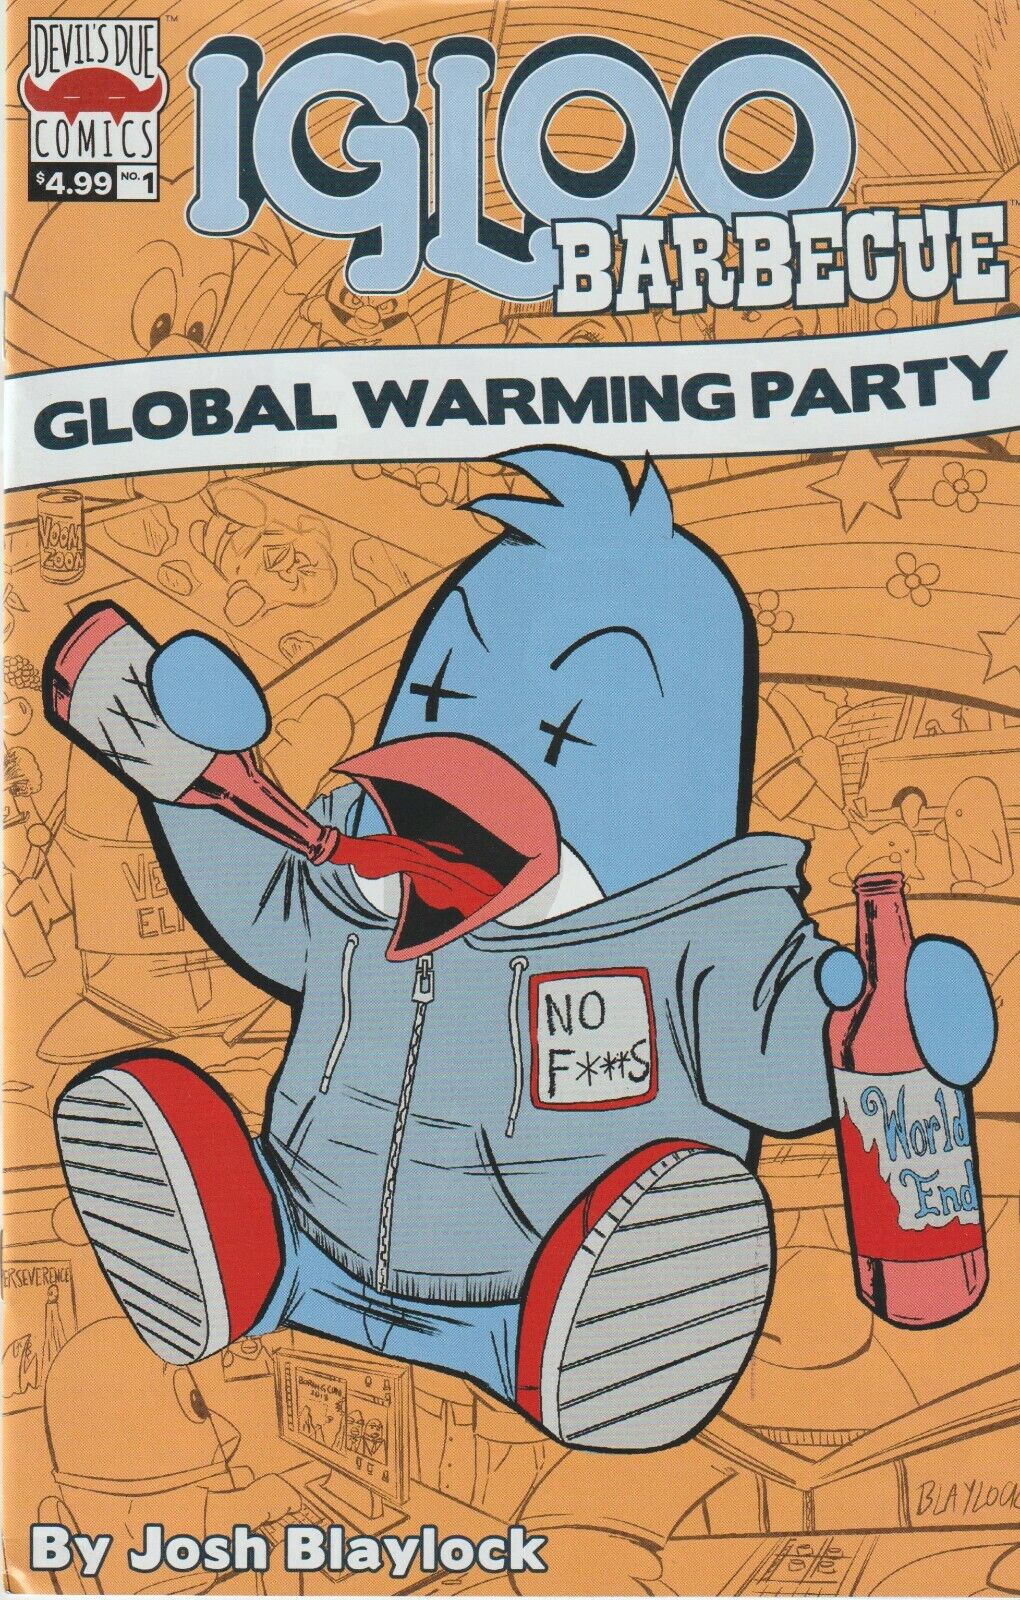 IGLOO BARBECUE: GLOBAL WARMING PARTY #1